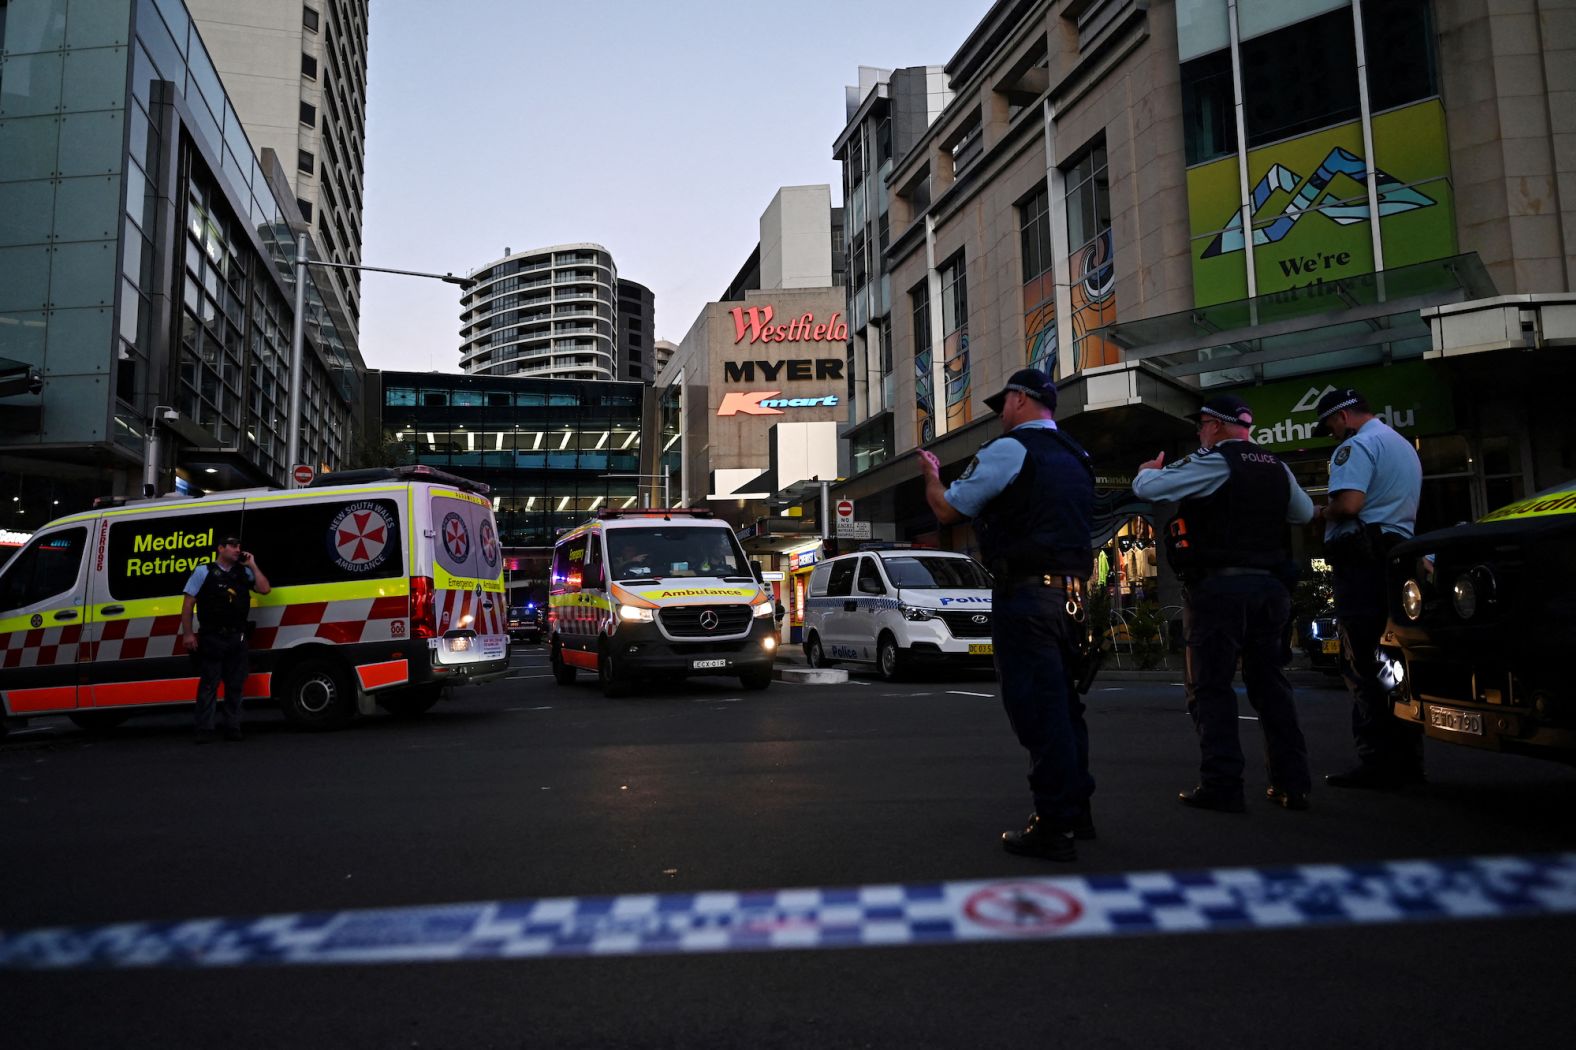 Emergency service workers on the scene after six people were killed and several injured in a <a href="index.php?page=&url=https%3A%2F%2Fwww.cnn.com%2Faustralia%2Flive-news%2Fsydney-mall-attack-updates-intl%2Findex.html" target="_blank">mass stabbing</a> at the Westfield Bondi Junction shopping mall in Sydney, Australia, on Saturday, April 13.